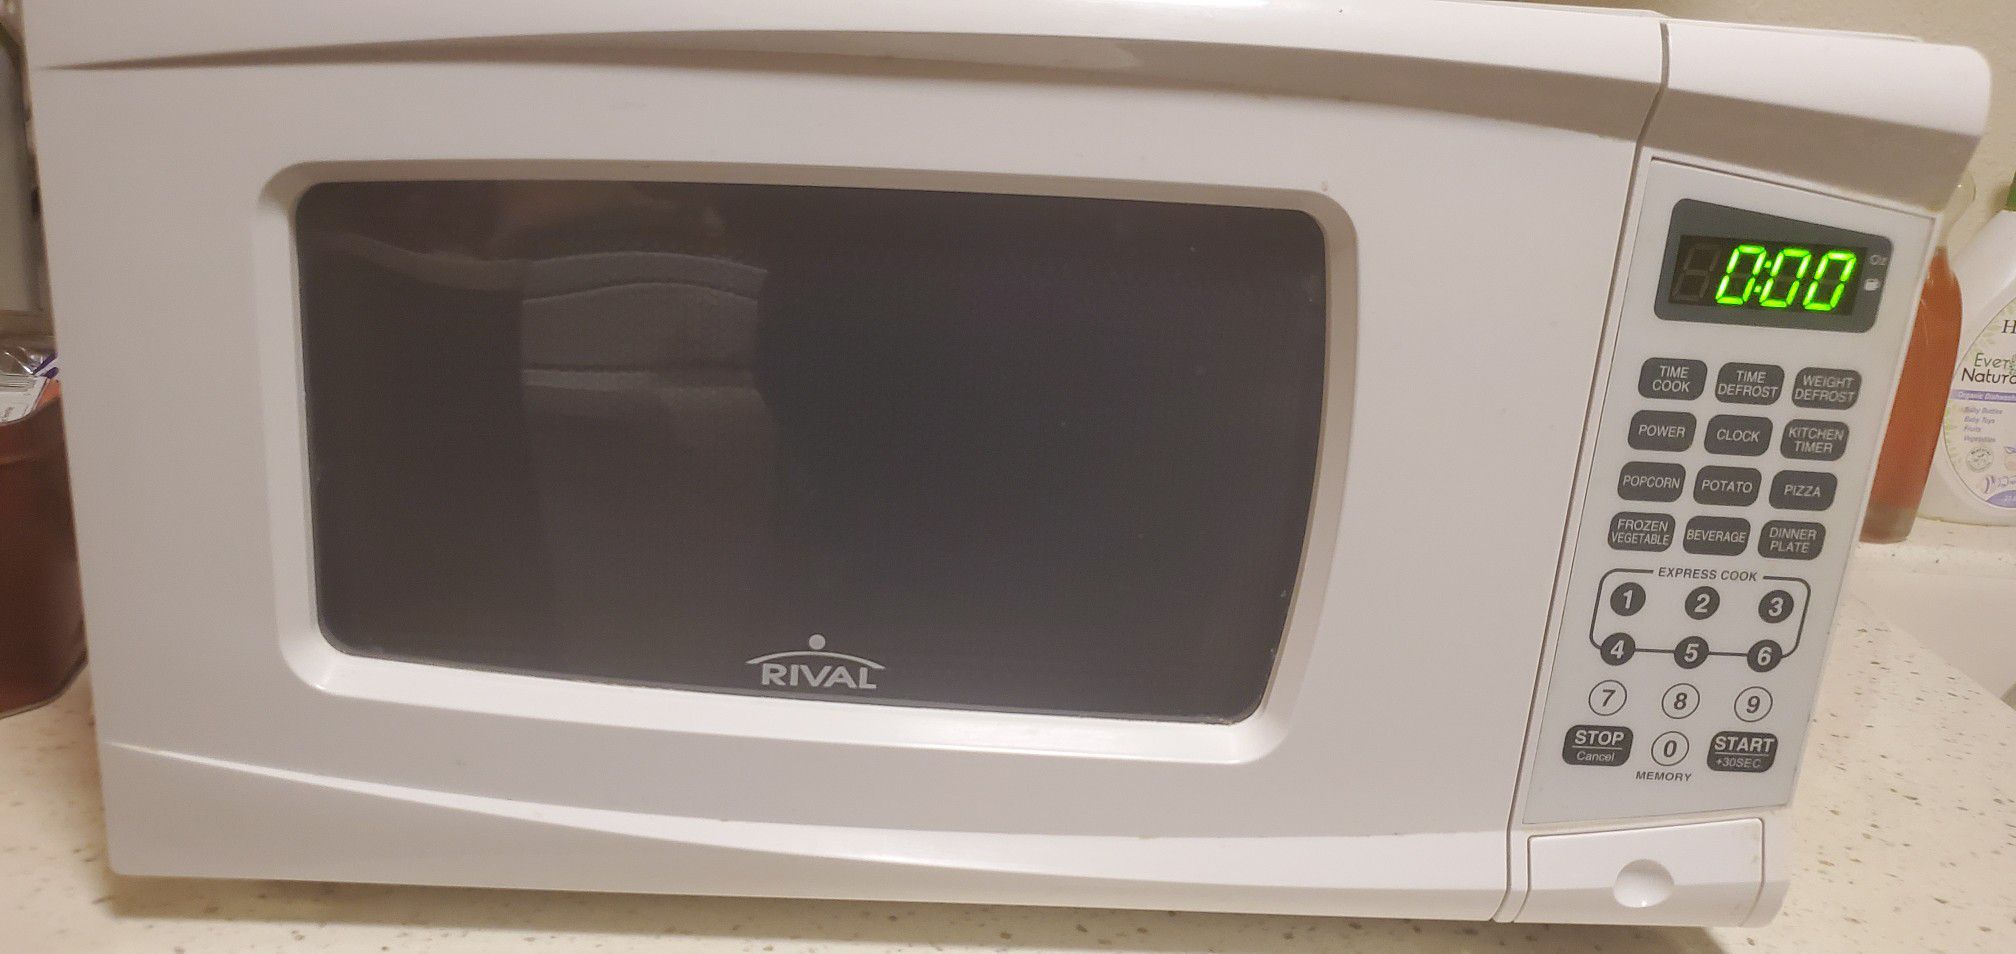 Like new Microwave. Was used a few months